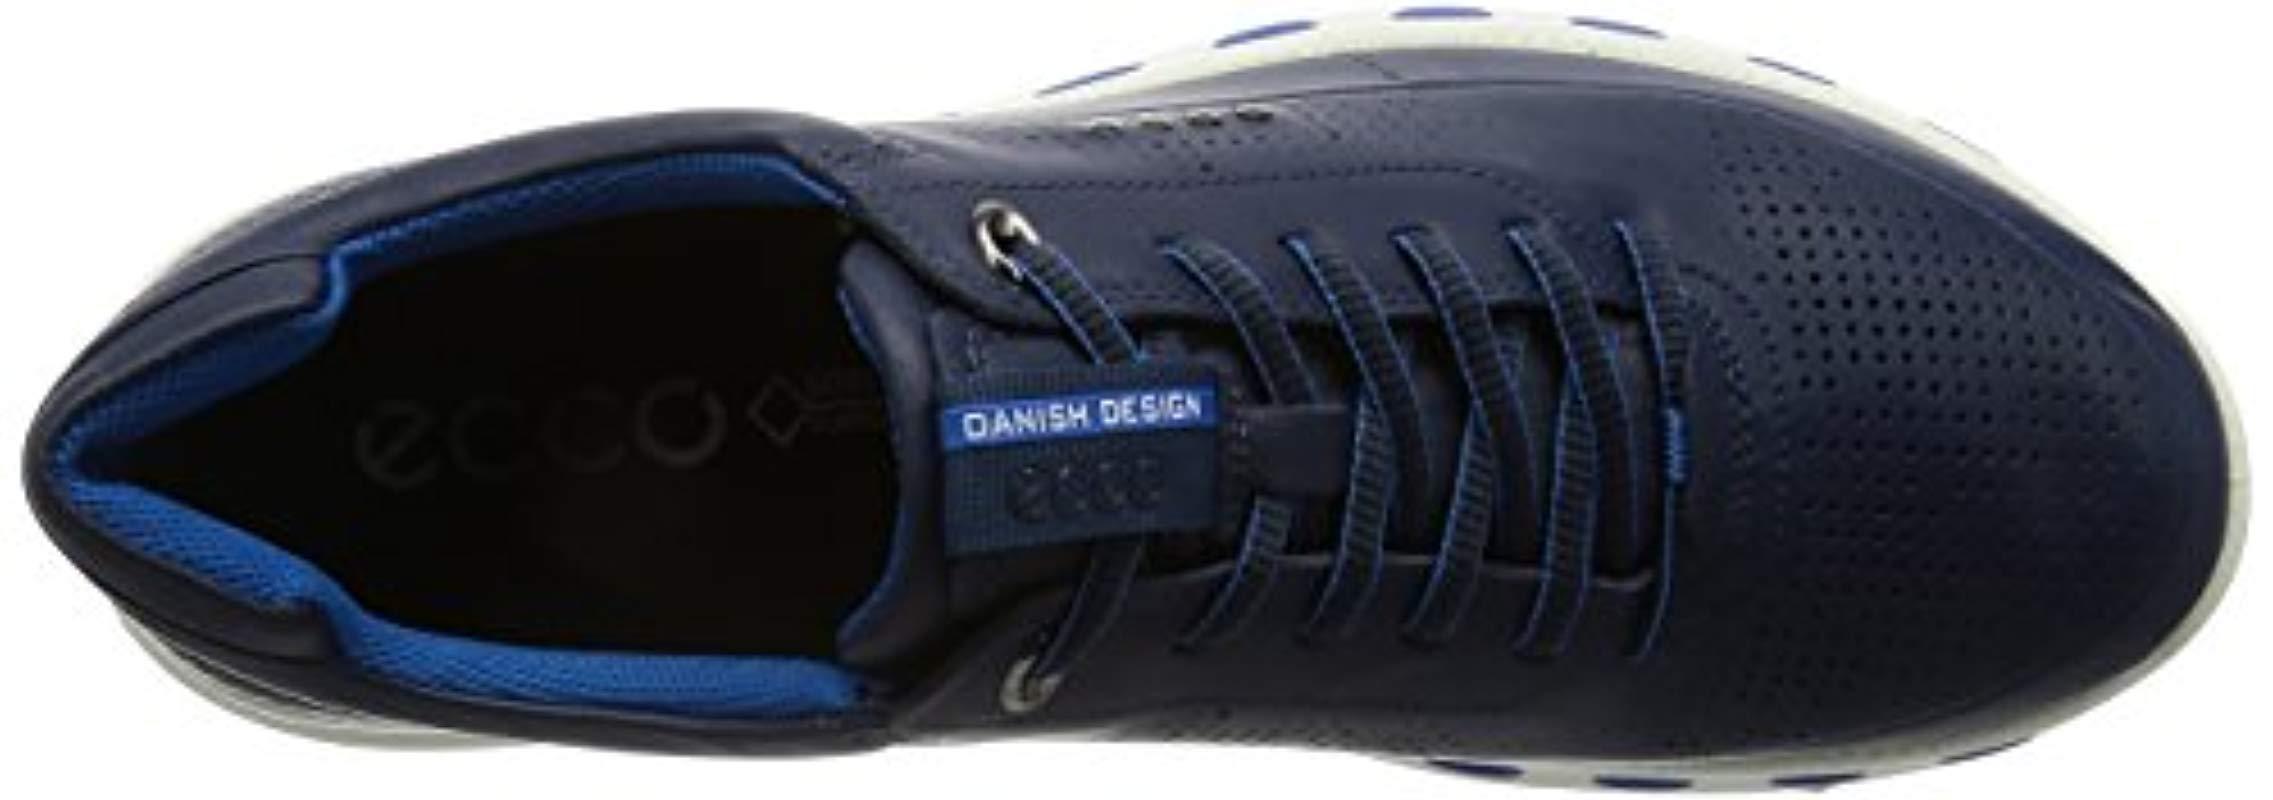 Ecco Cool 2.0 Leather Gore-tex Fashion Sneaker in Blue for Men - Lyst